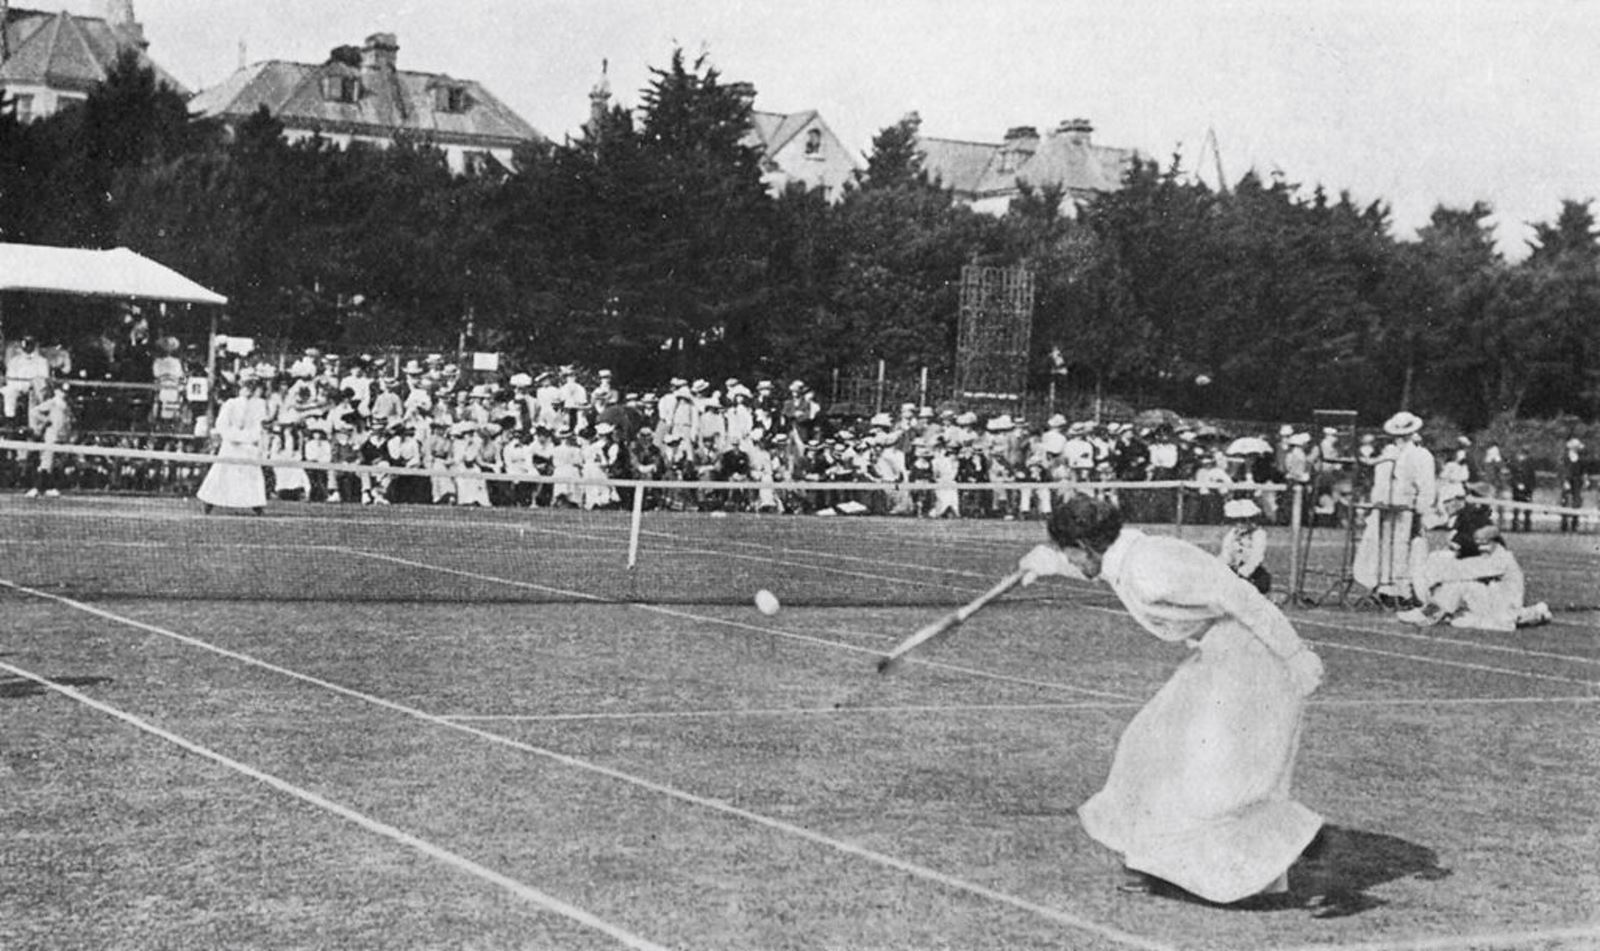 Blanche Bingley and Charlotte Cooper playing tennis at Devonshire Park